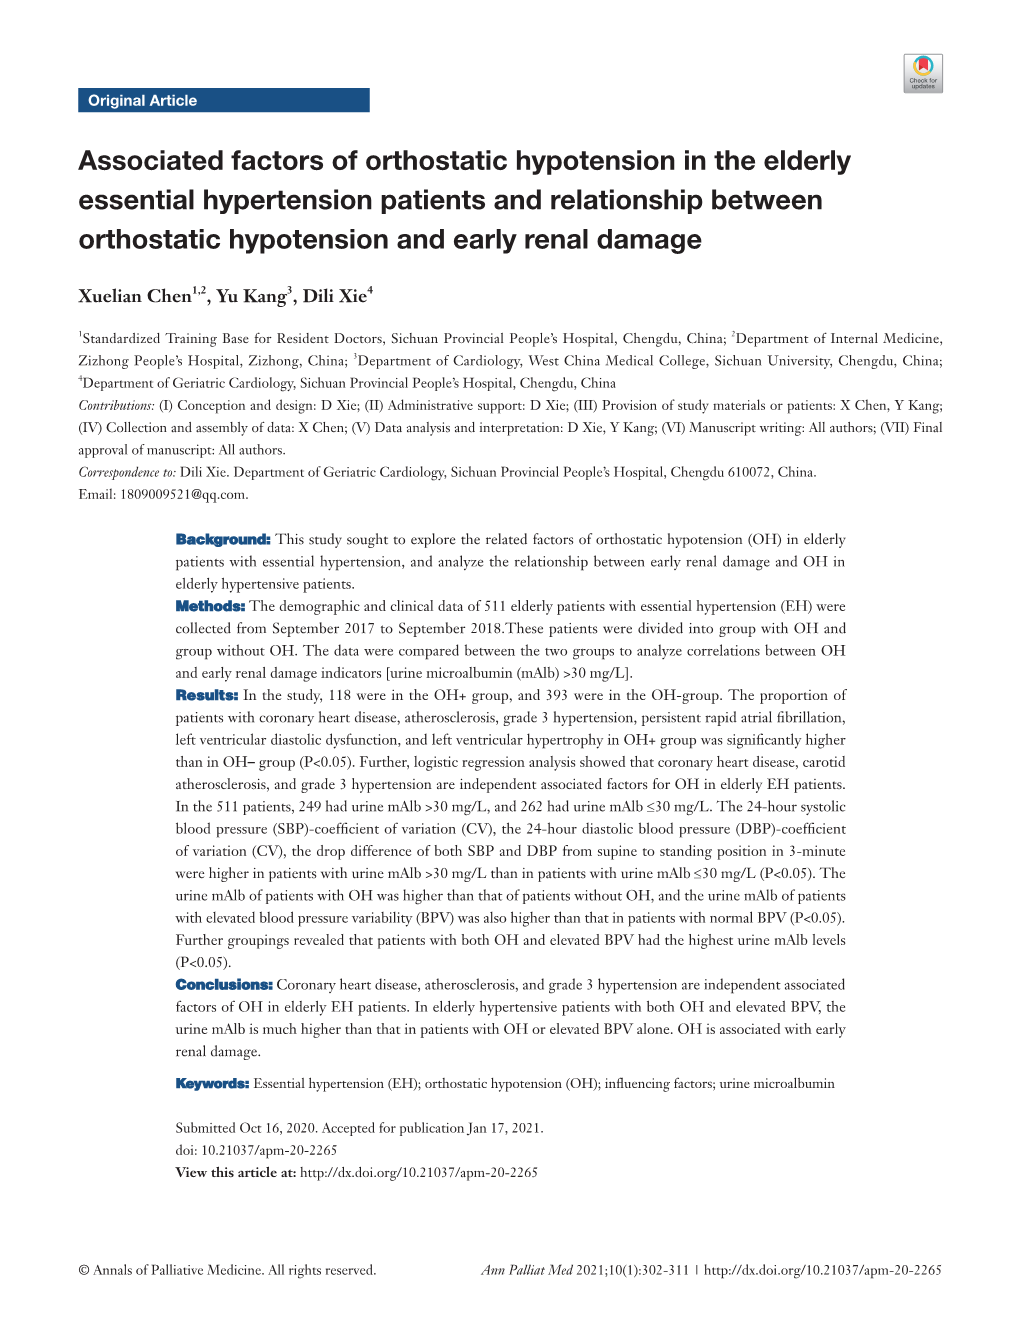 Associated Factors of Orthostatic Hypotension in the Elderly Essential Hypertension Patients and Relationship Between Orthostatic Hypotension and Early Renal Damage